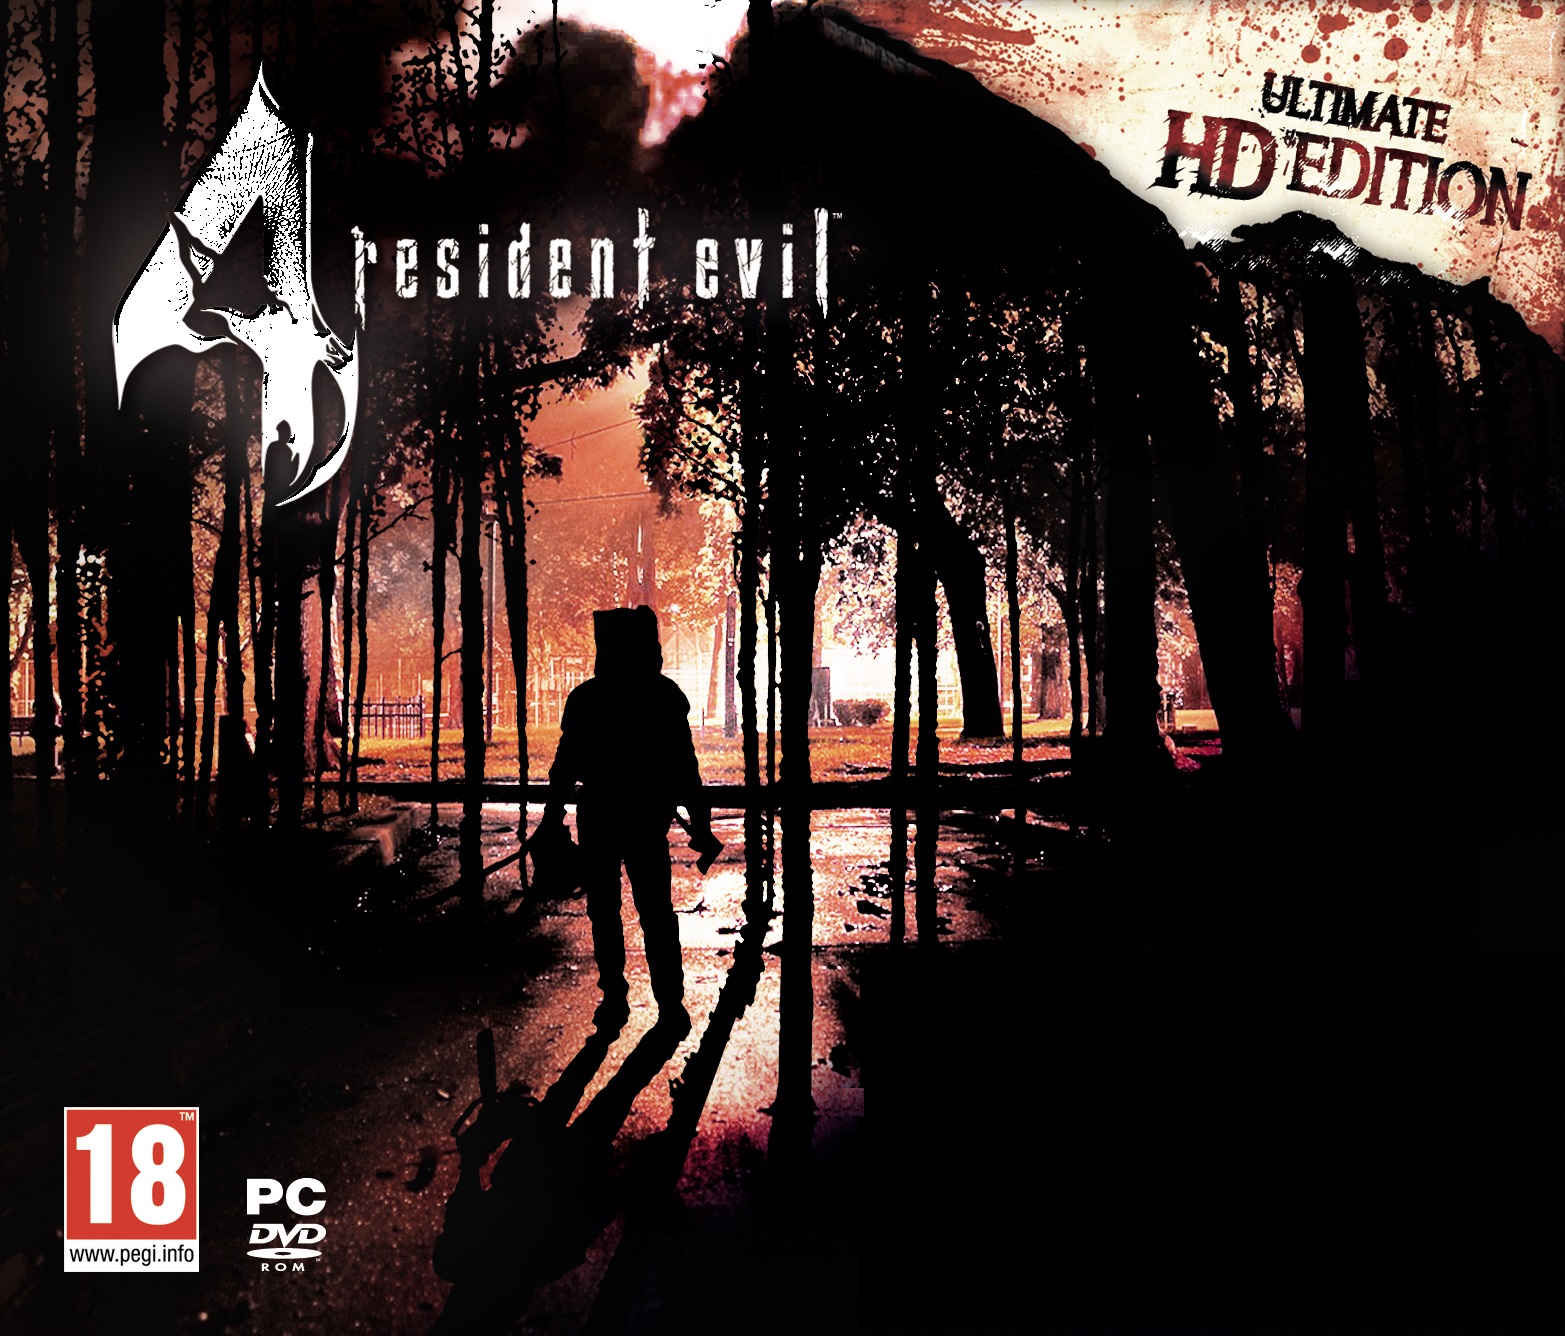 Resident evil 4 pc game free download for windows 8.1